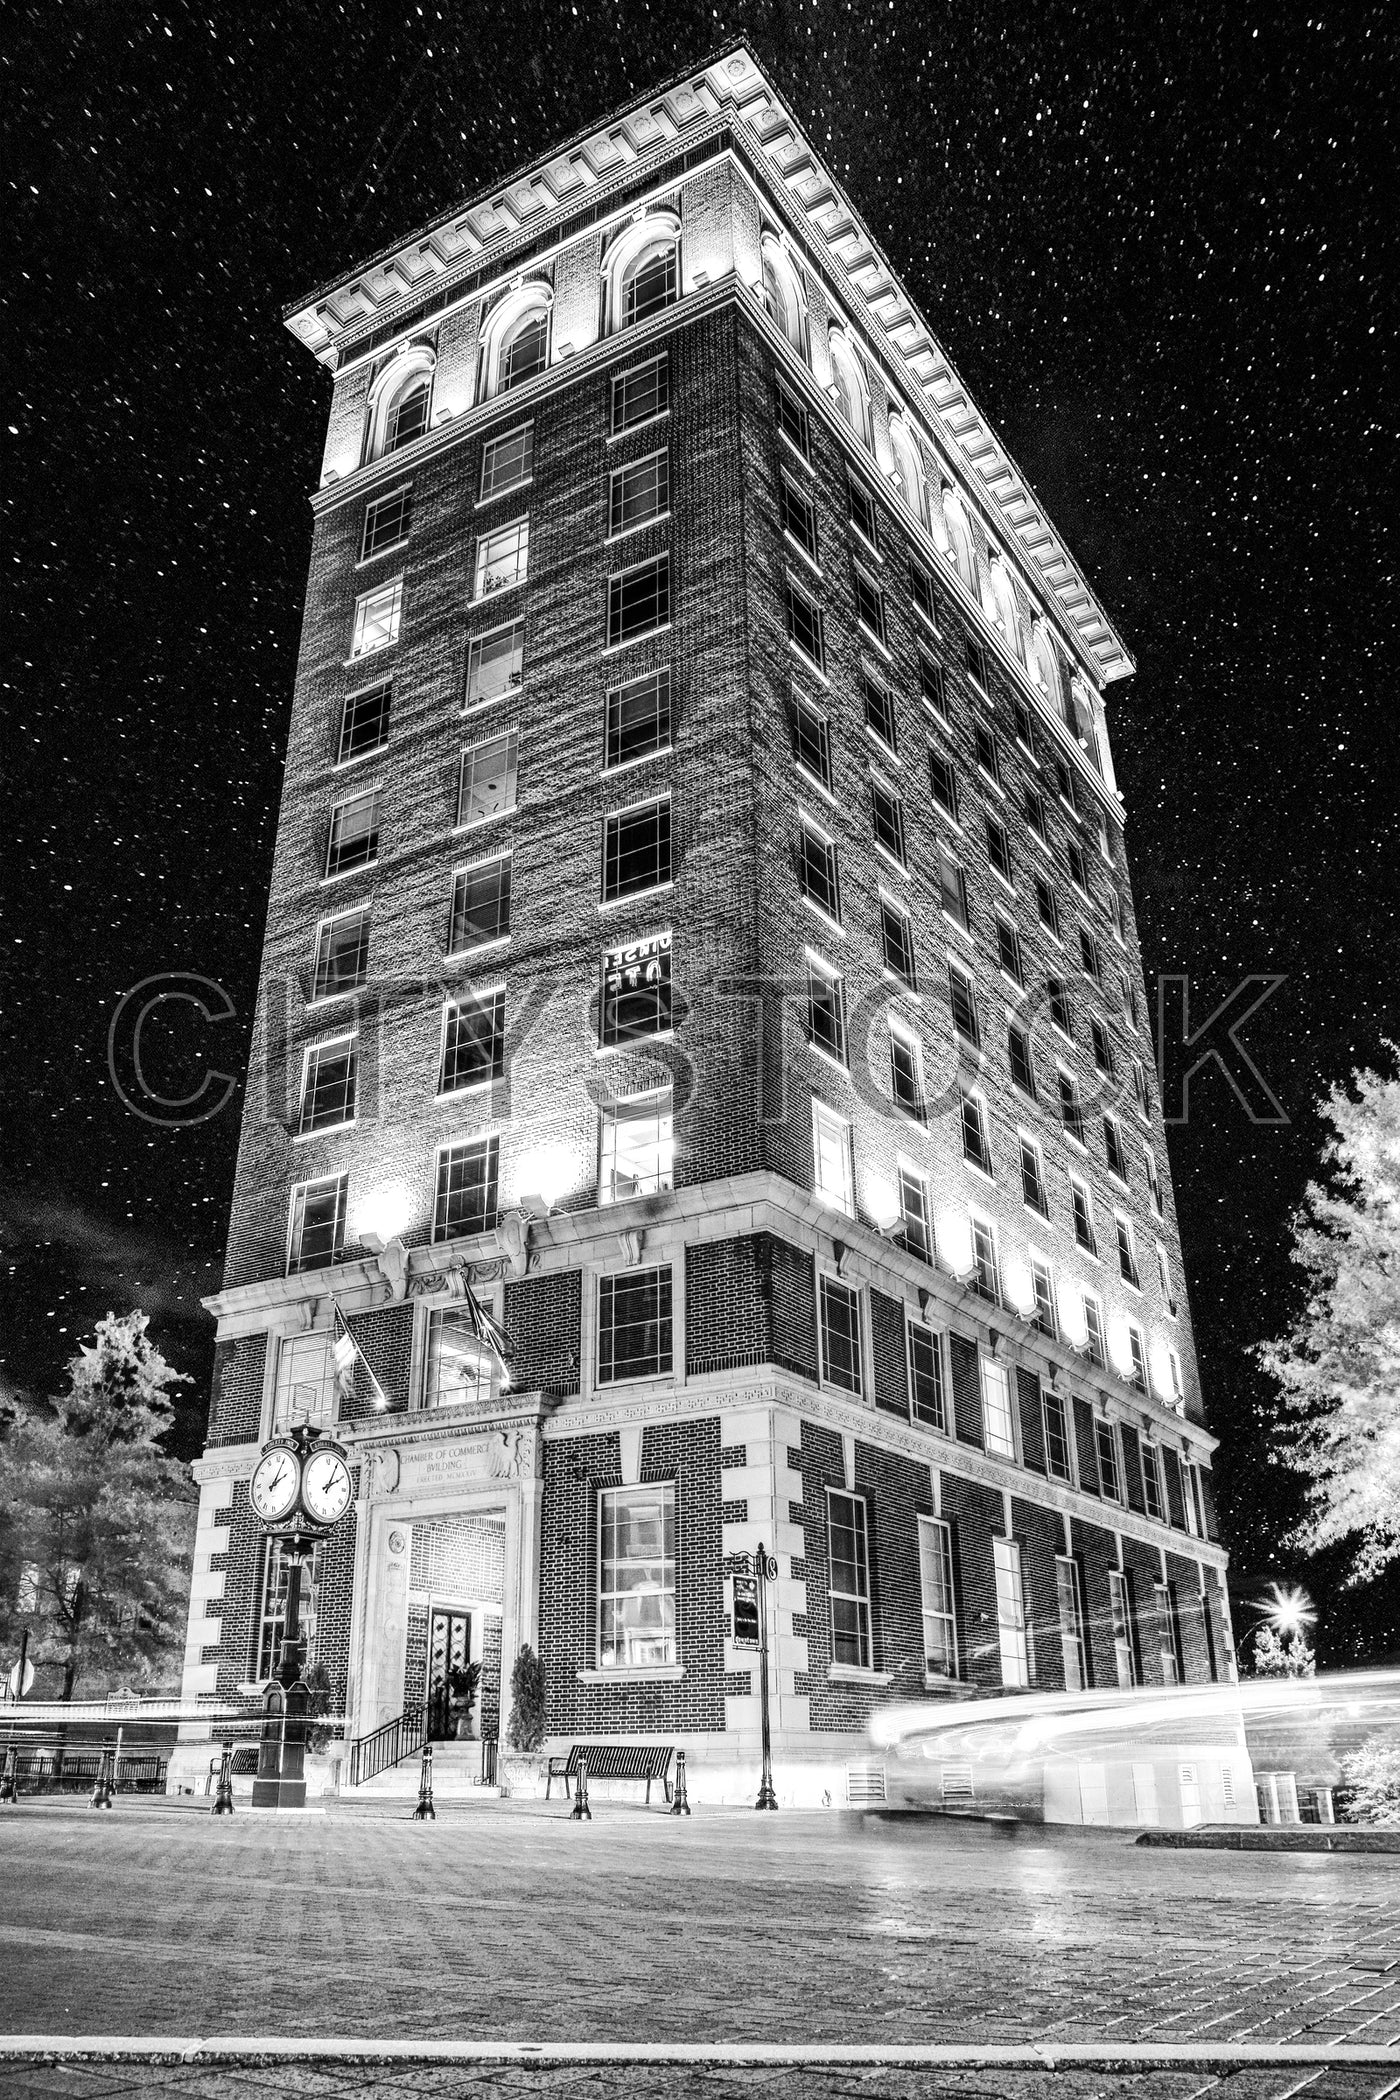 Historical building in Greenville SC during winter night